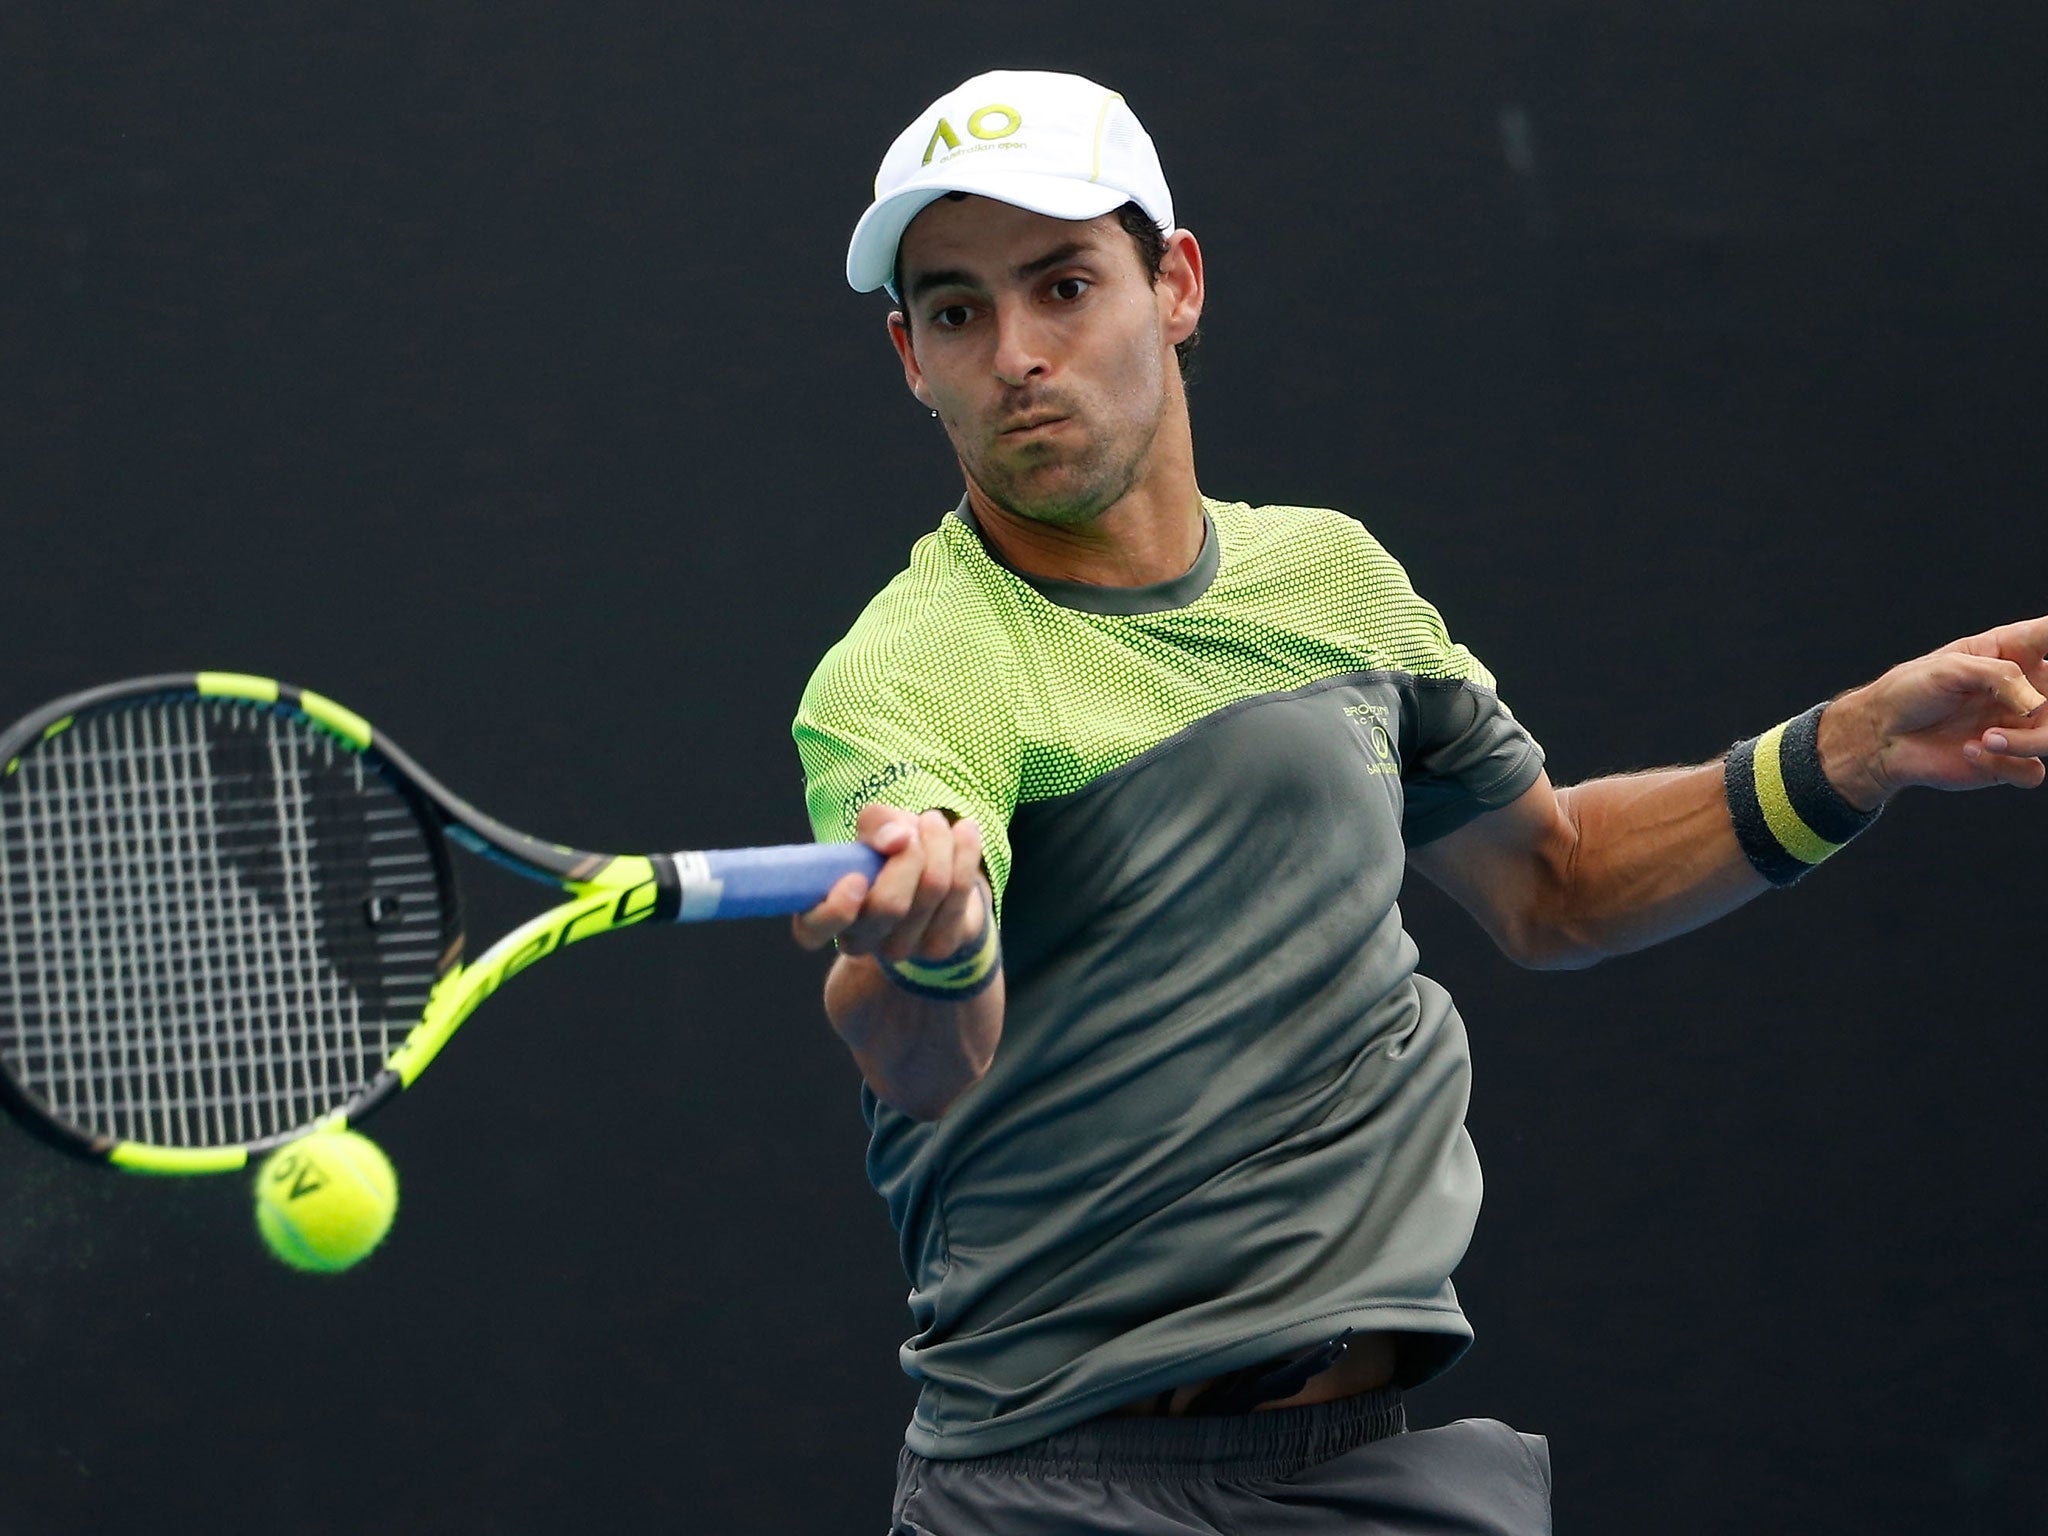 Santiago Giraldo was no match for Evans as he succumbed in straight sets